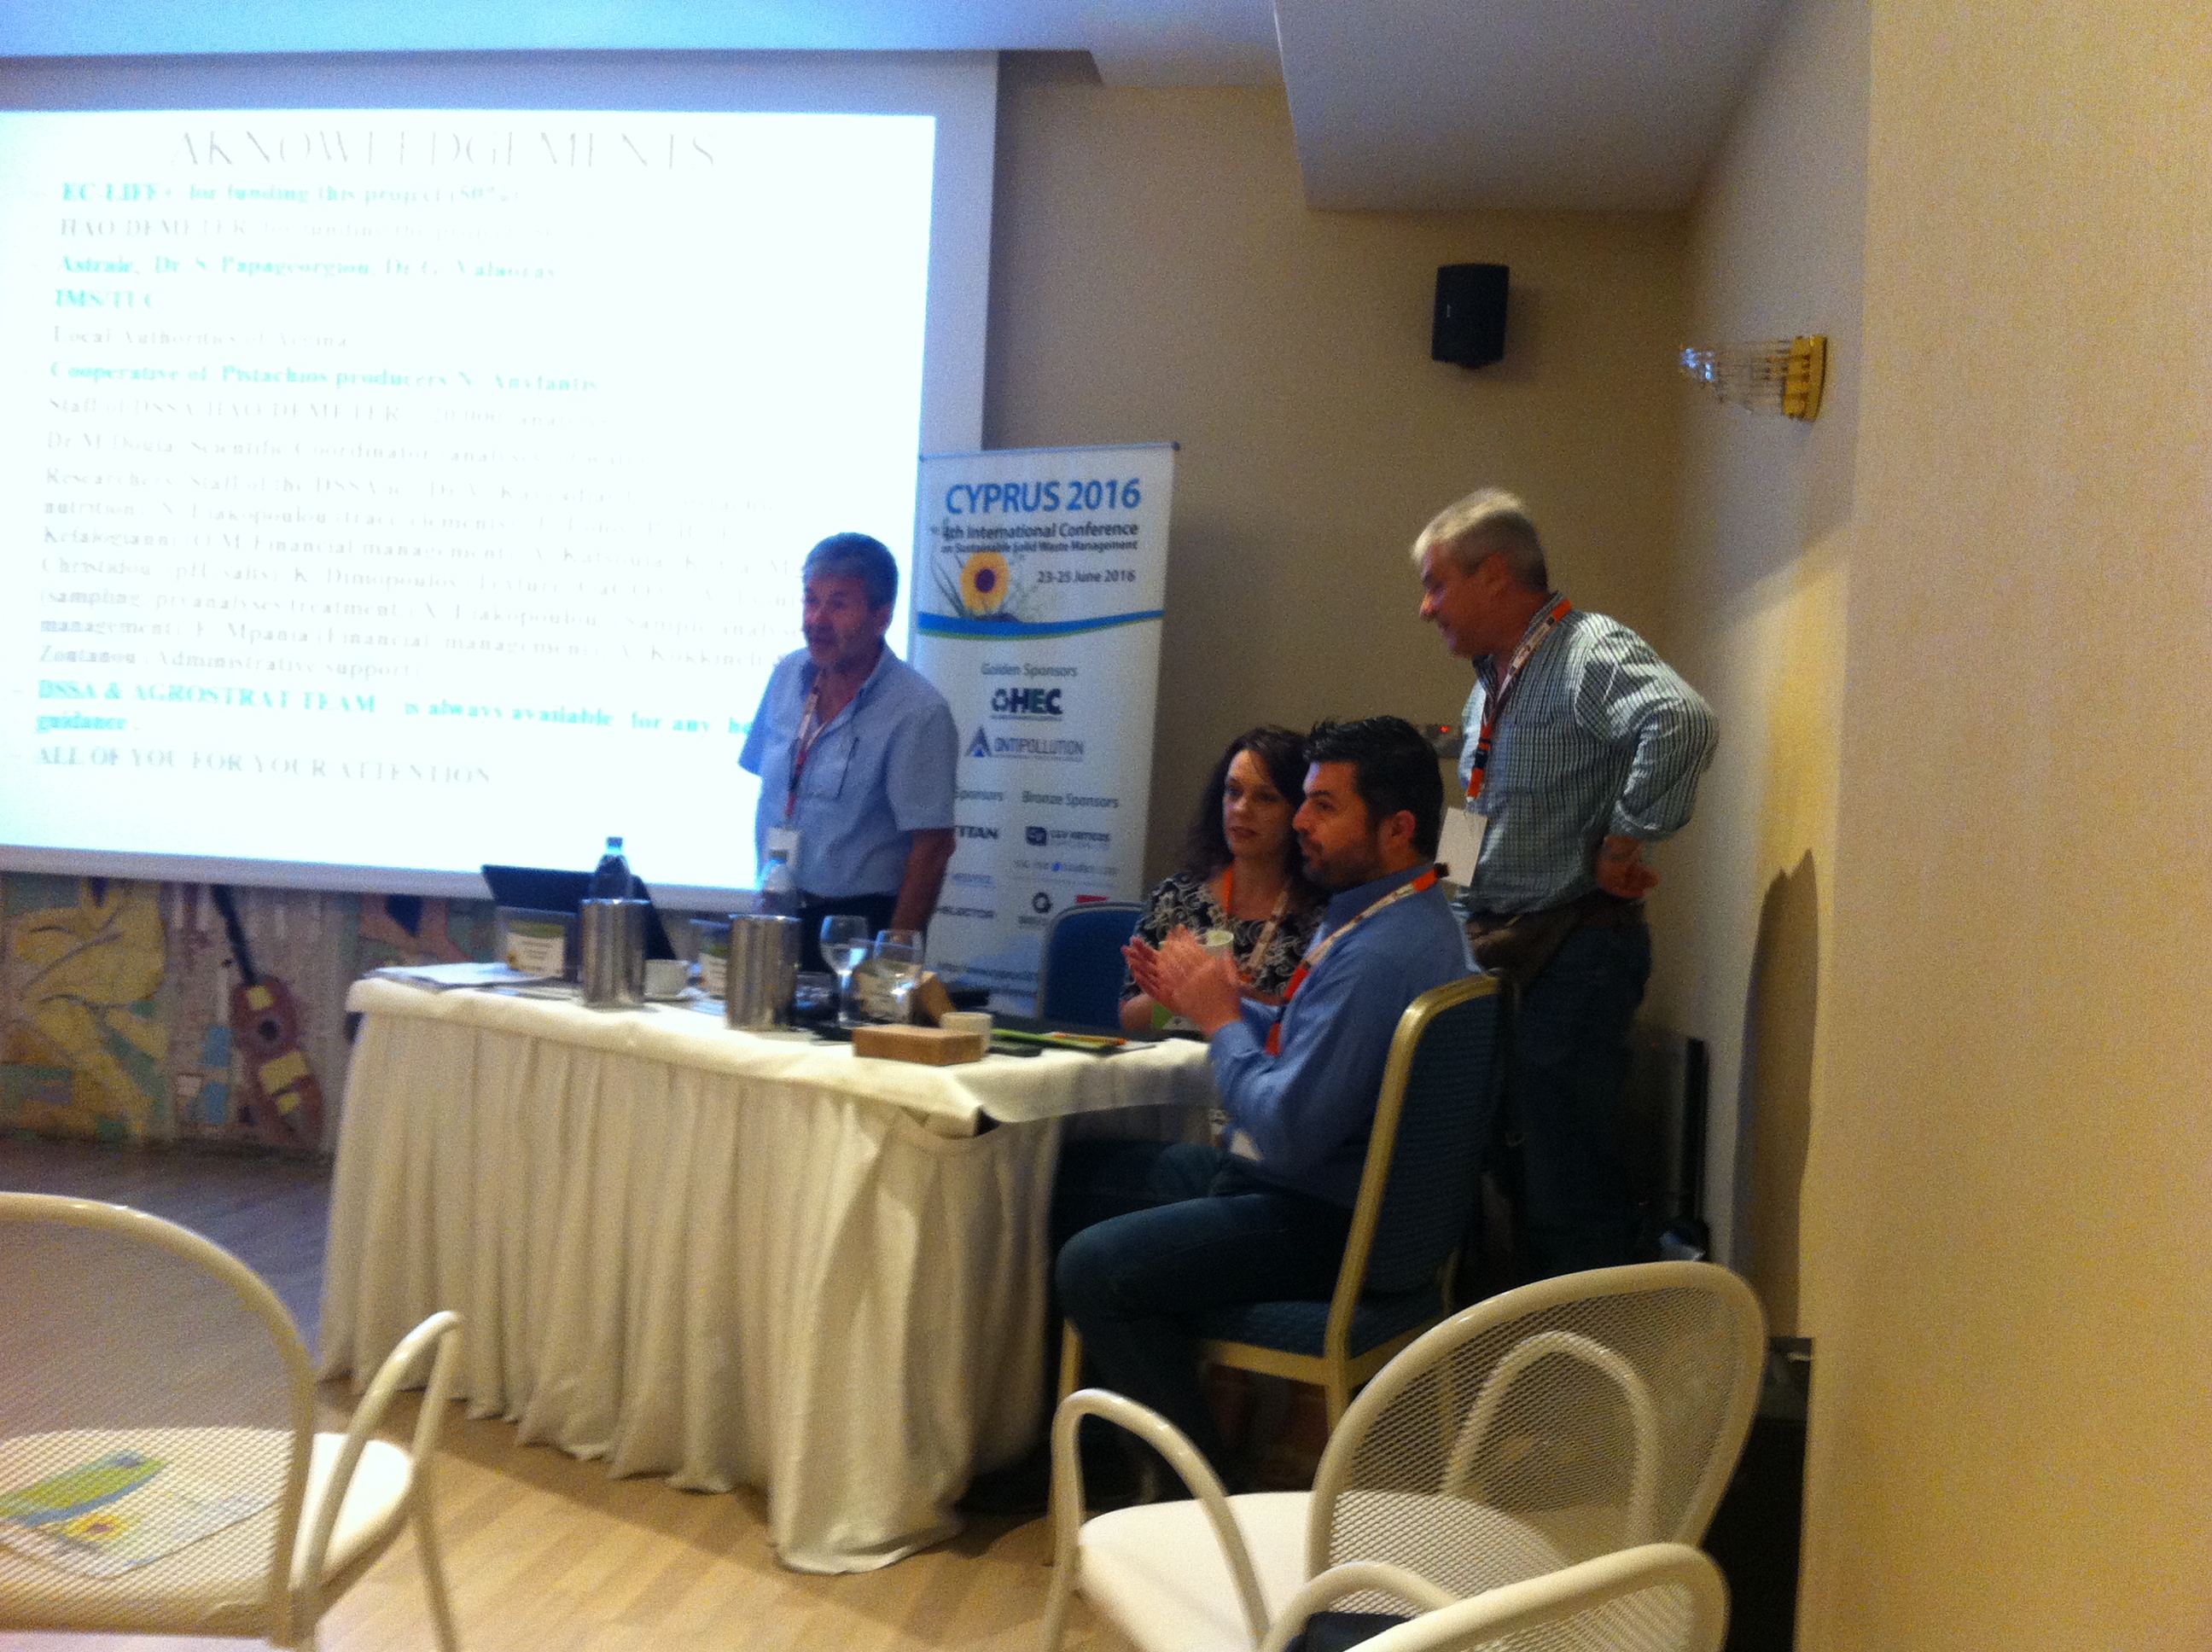 Agrostart partiales in Cyprus 2016 Conference